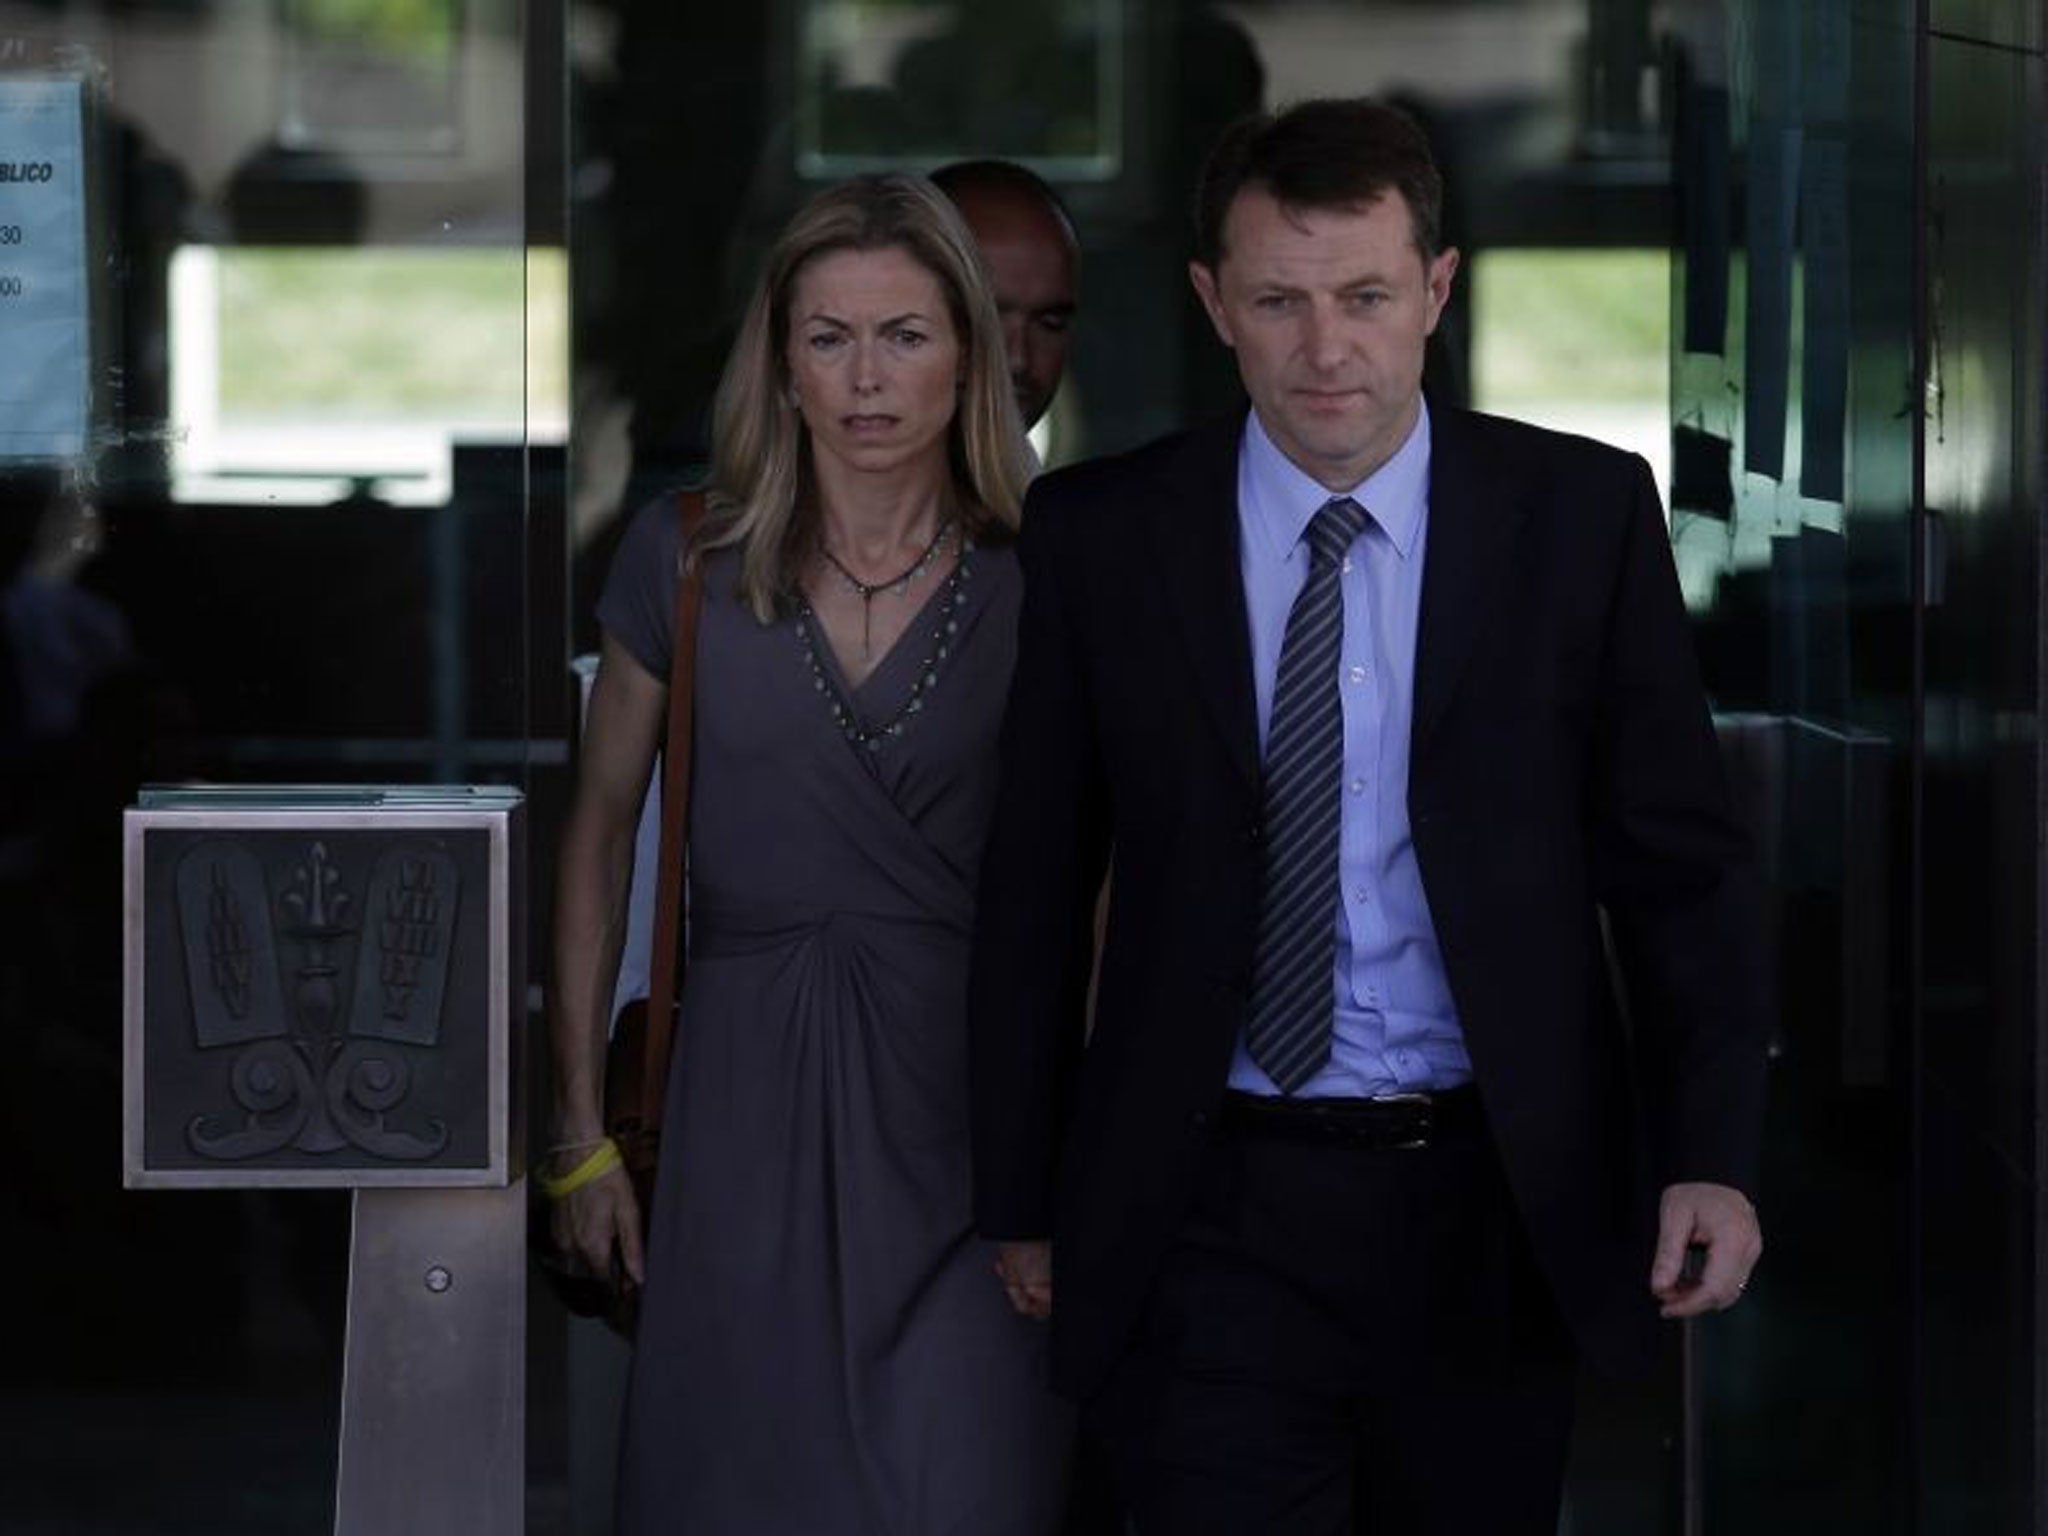 Kate, centre, and Gerry McCann, the parents of the missing British girl Madeleine McCann, leave a court in Lisbon